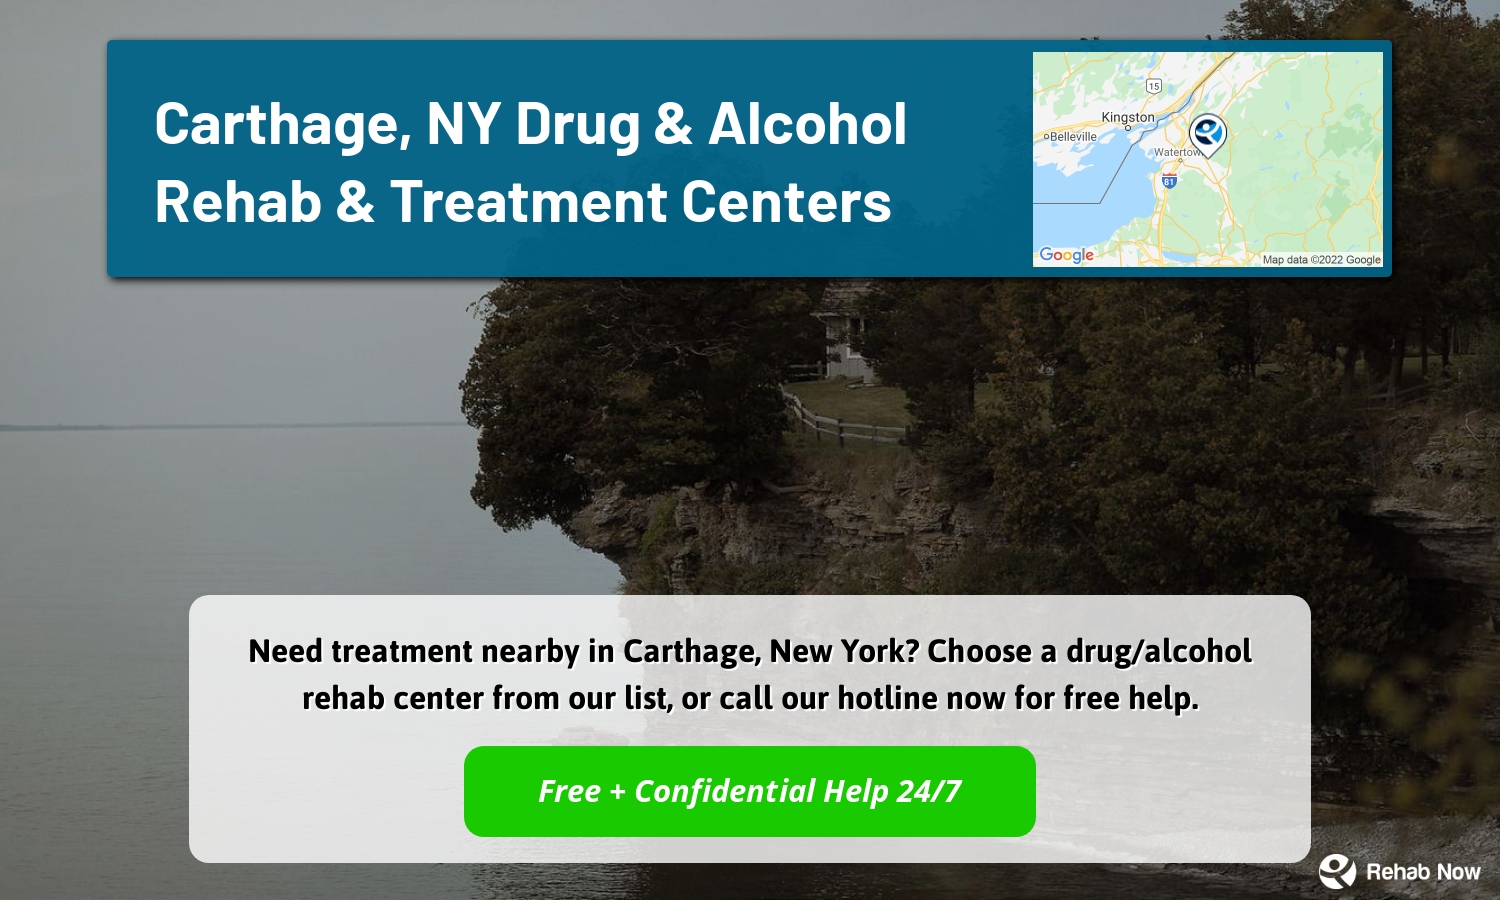 Need treatment nearby in Carthage, New York? Choose a drug/alcohol rehab center from our list, or call our hotline now for free help.